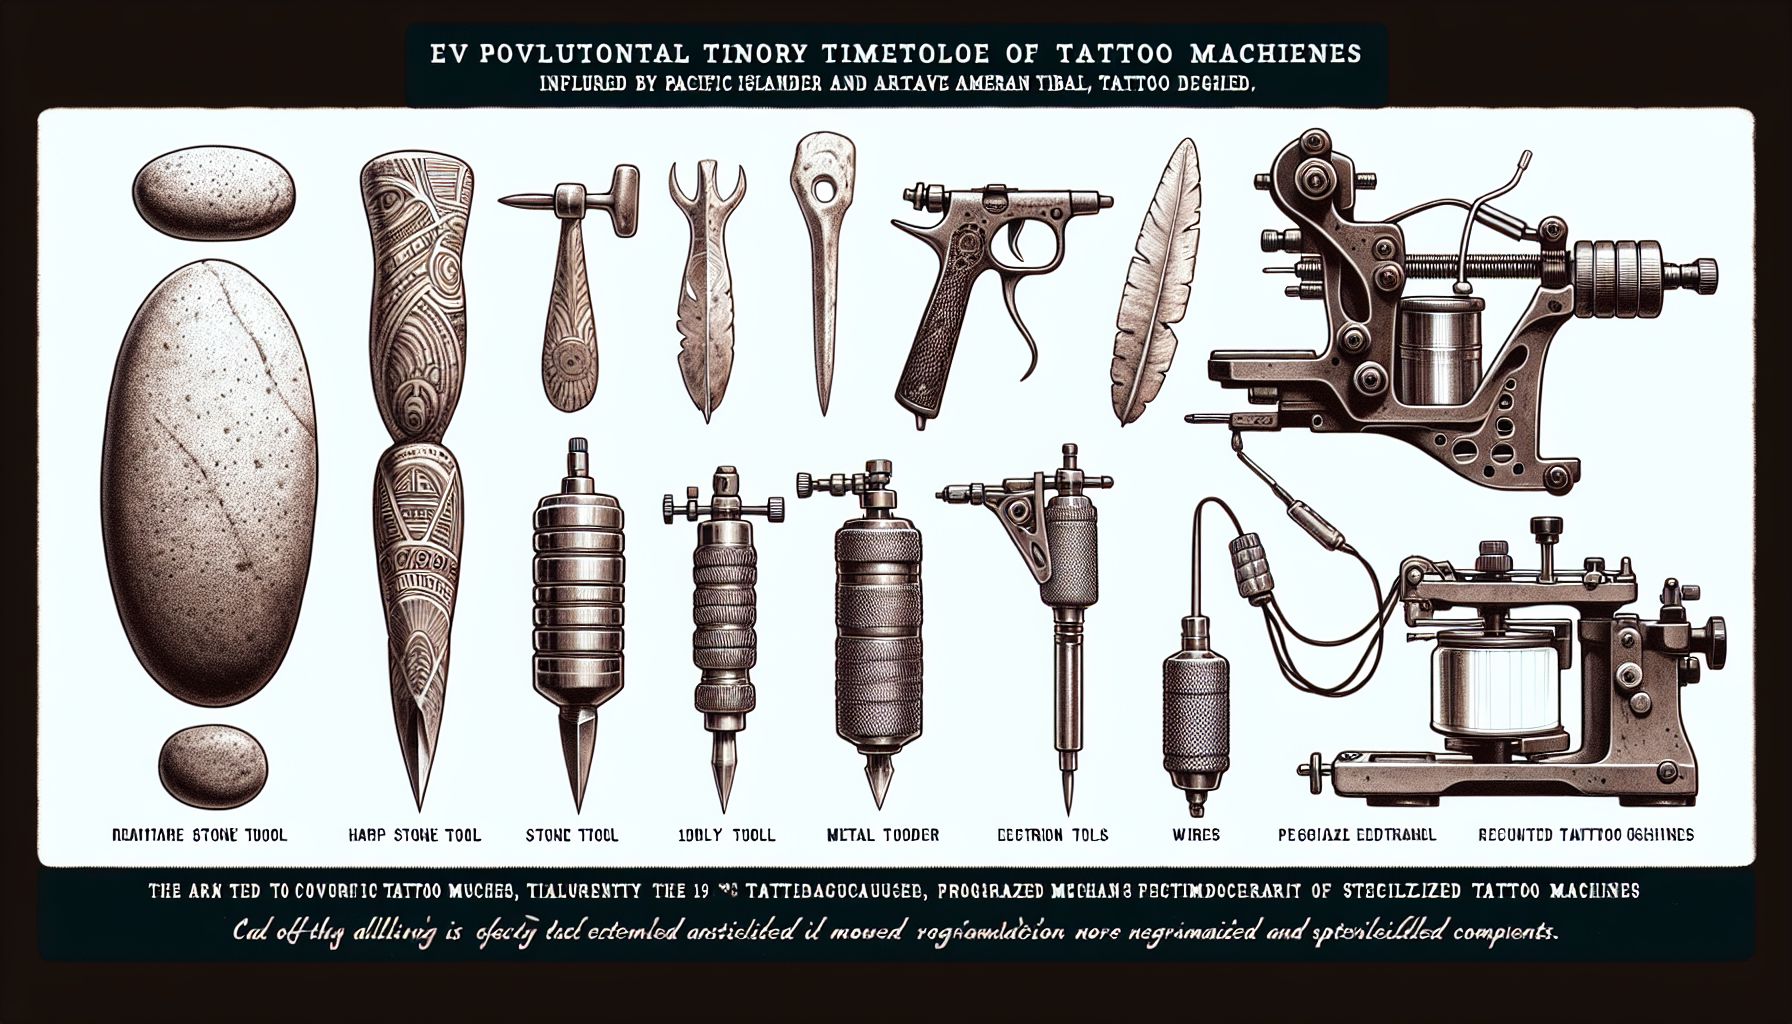 The Evolution of Tattoo Machines: From Simple Tools to Advanced Technological Marvels